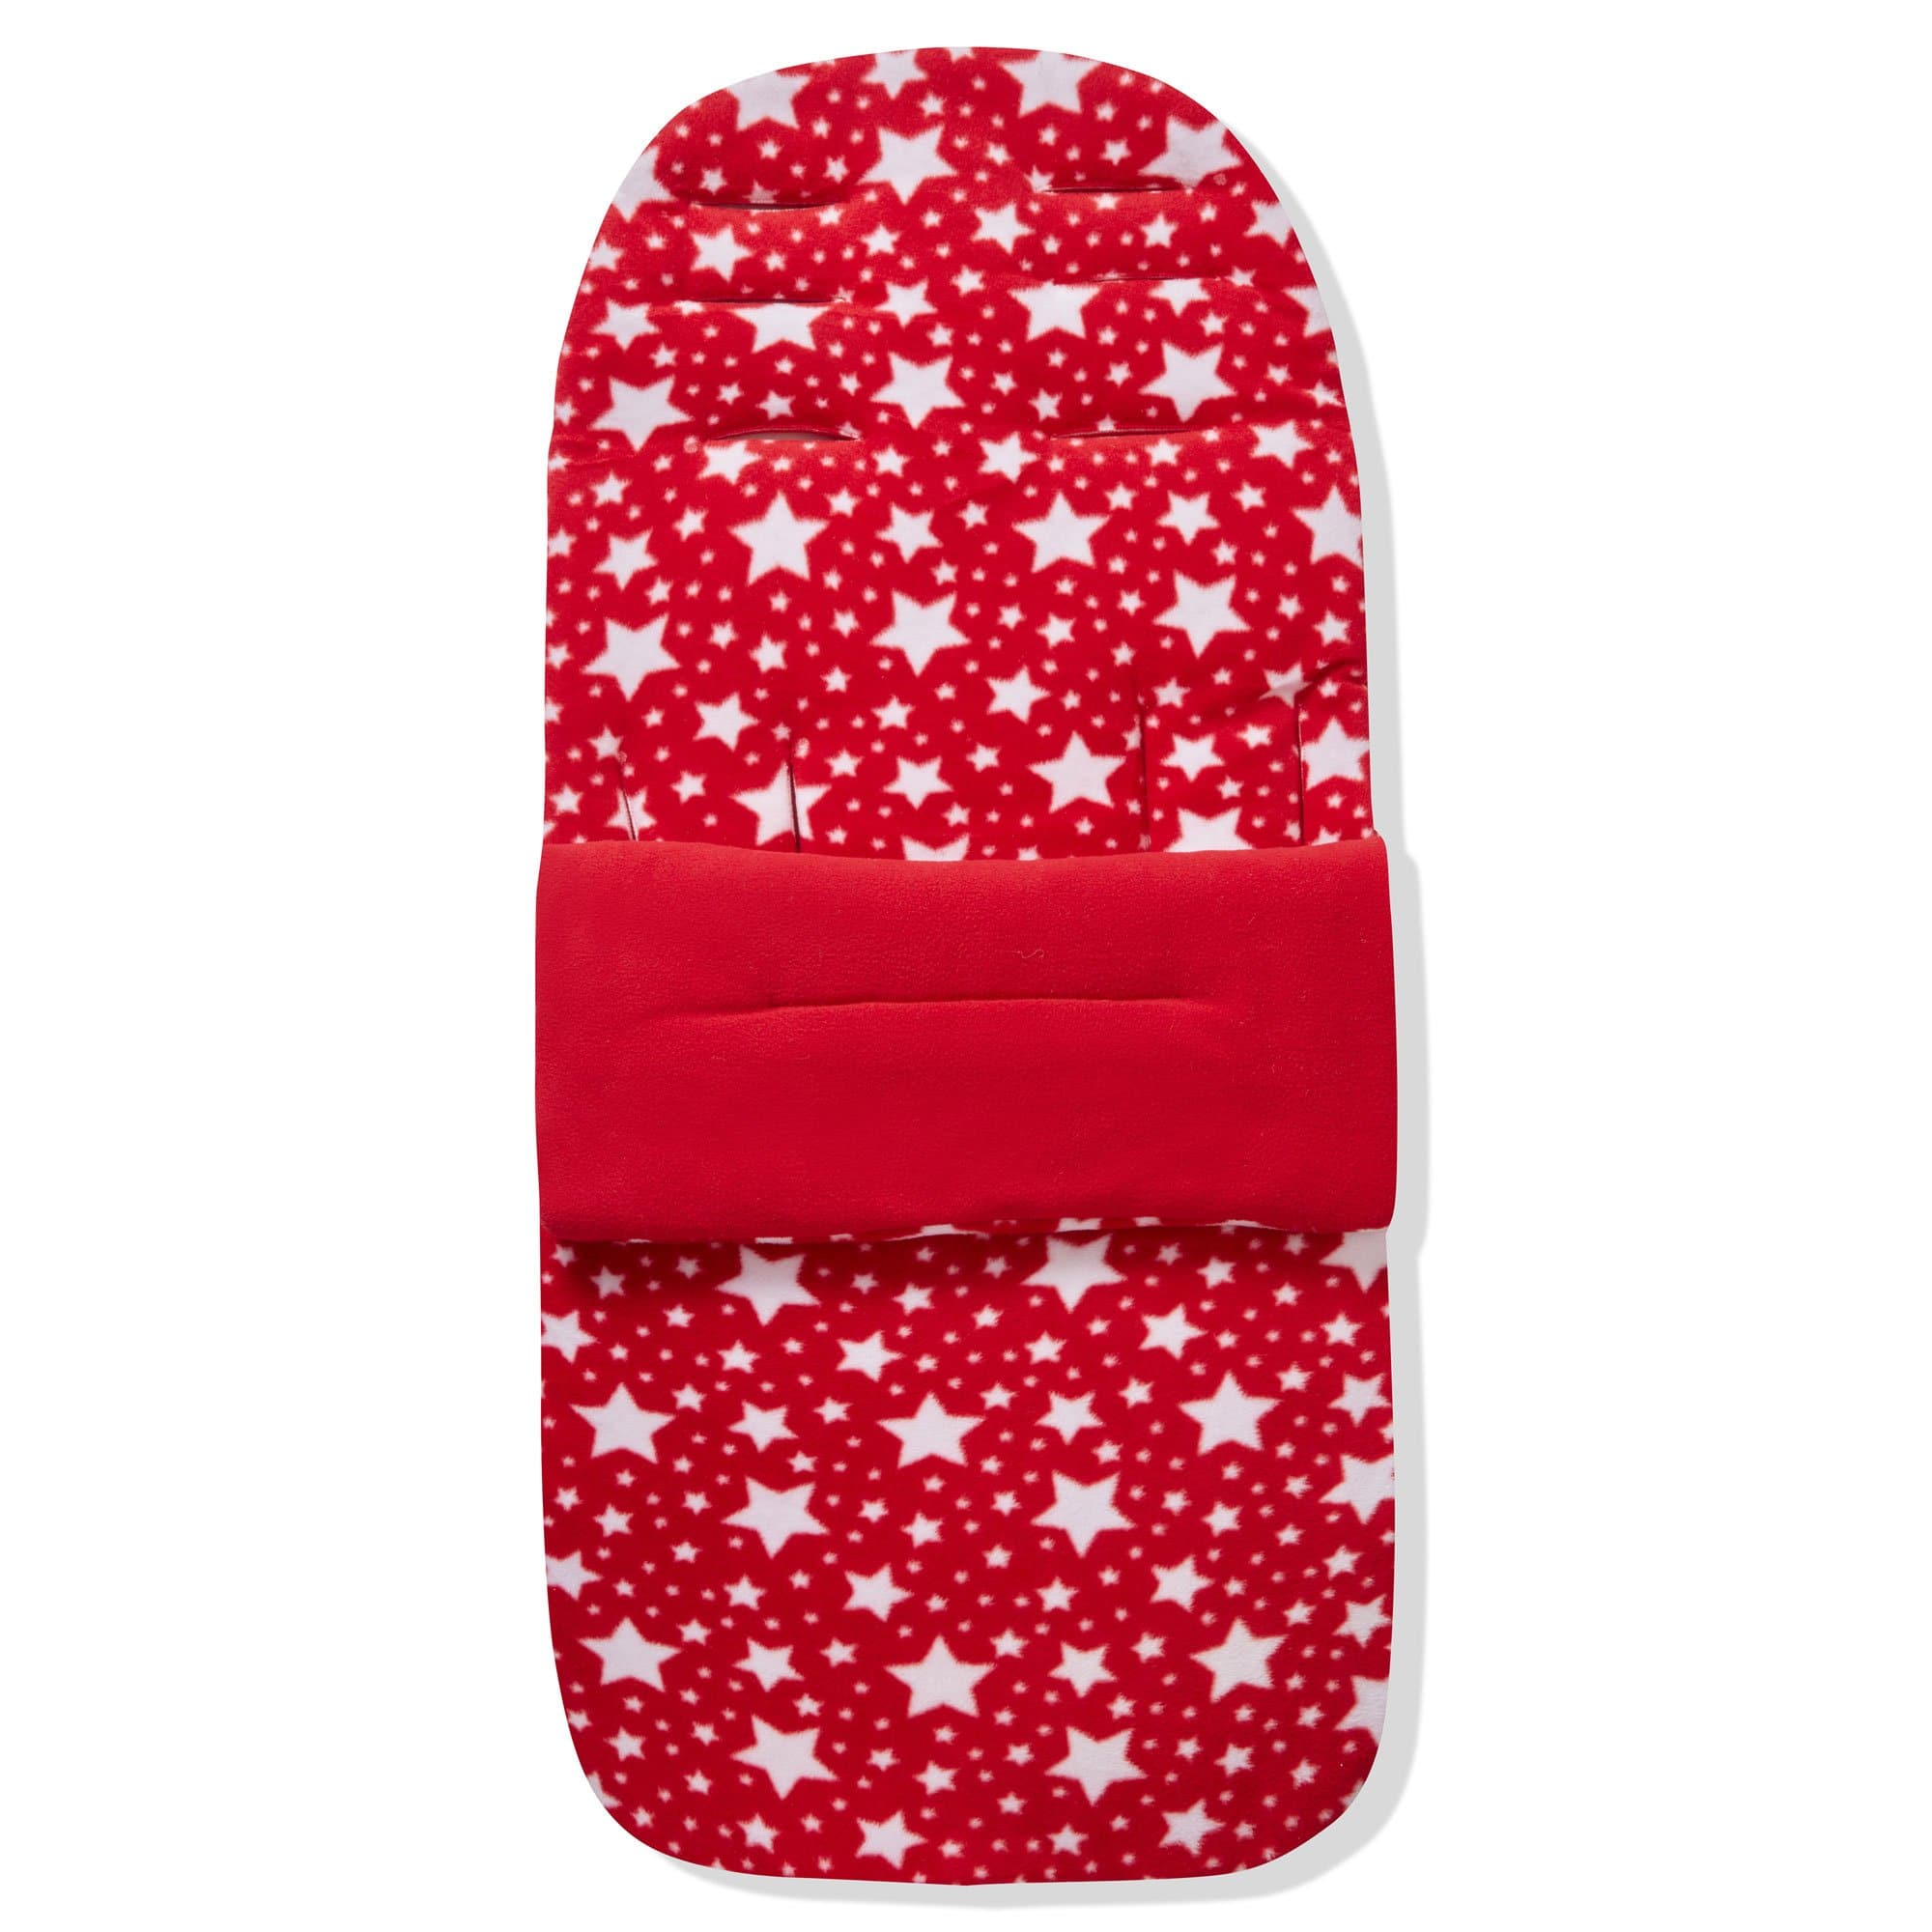 Fleece Footmuff / Cosy Toes Compatible with XTS - For Your Little One